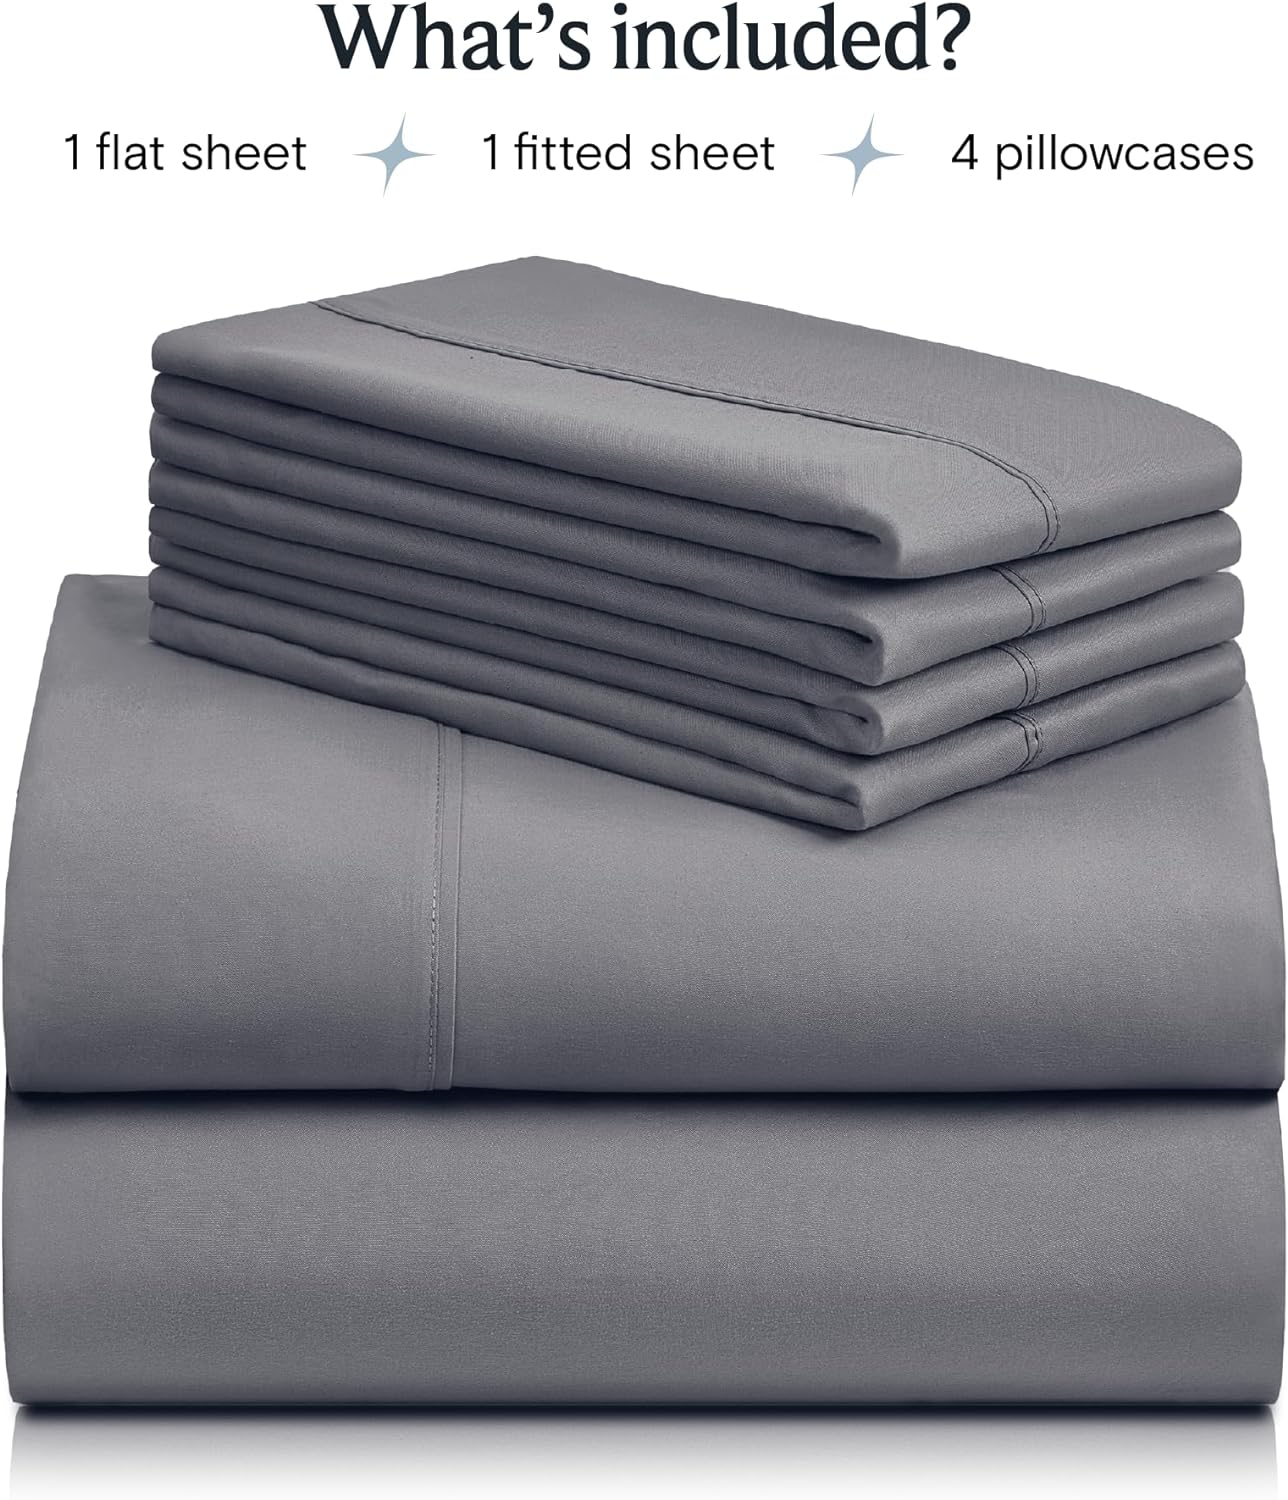 LuxClub 6 PC Queen Sheet Set, Rayon Made from Bamboo Bed Sheets, Deep Pockets 18" Eco Friendly Wrinkle Free Cooling Sheets Machine Washable Hotel Bedding Silky Soft - Light Grey Queen